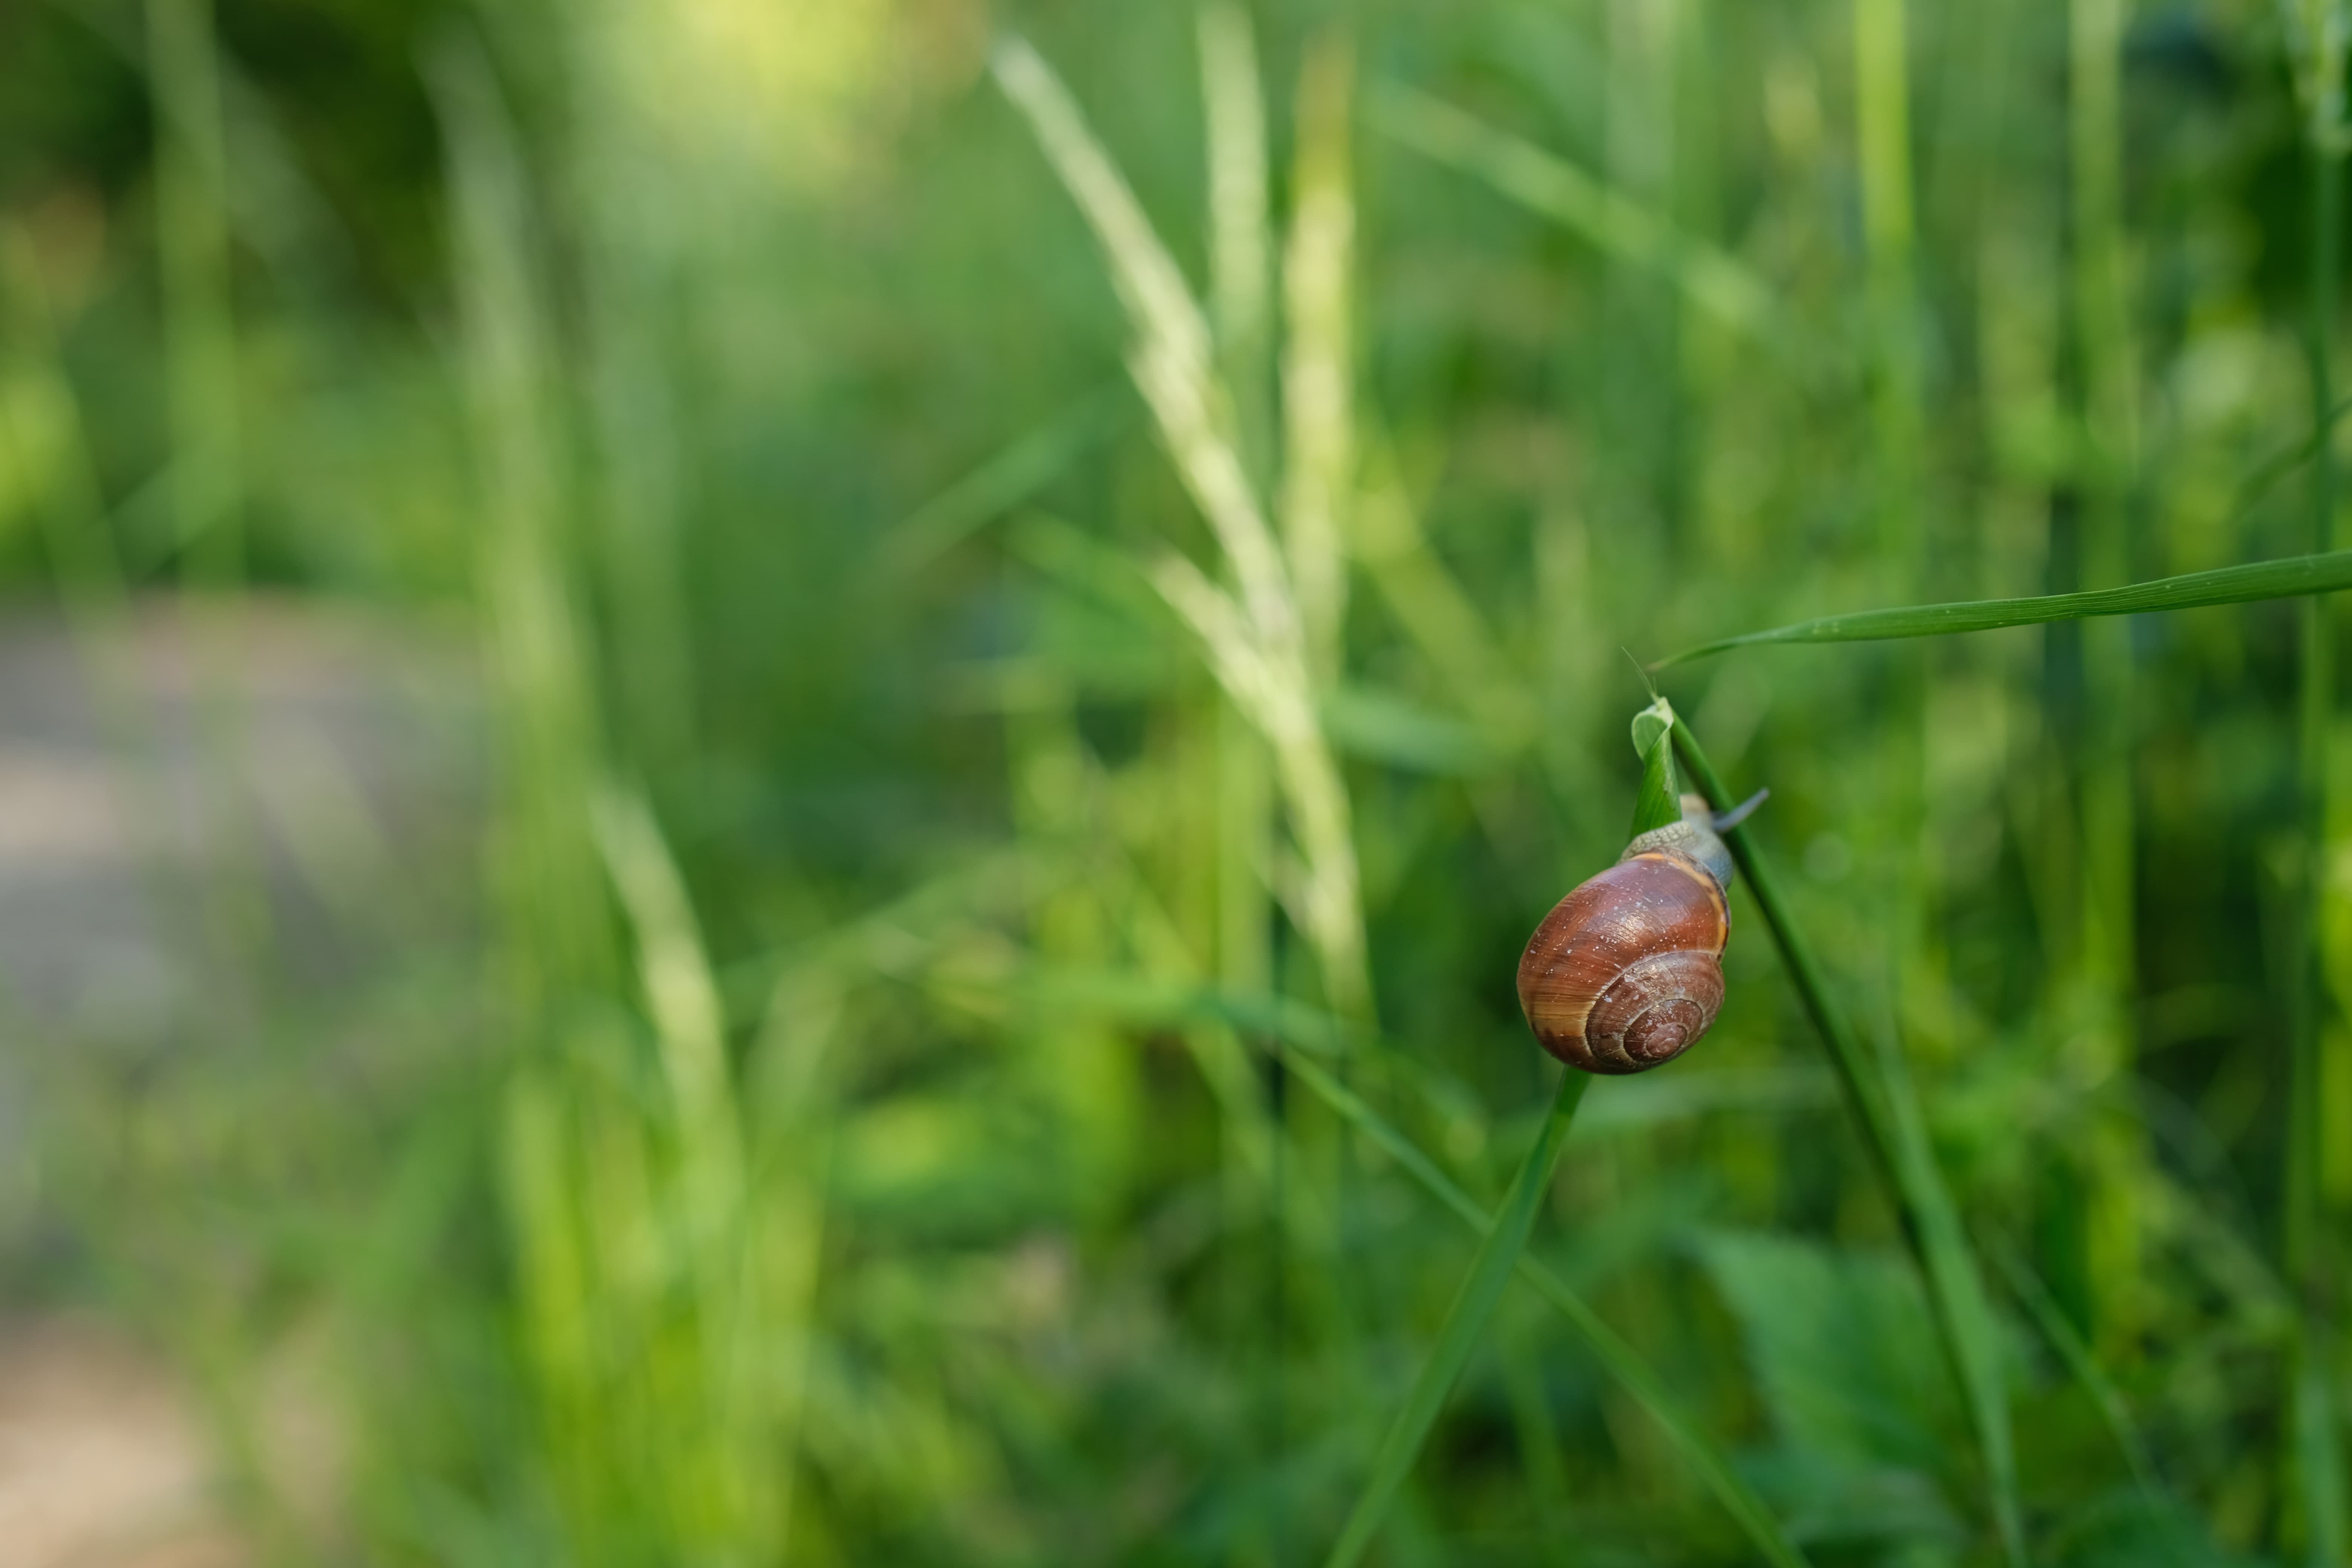 Snail with bokeh, 30mm, 1/140s, f/2.8, ISO160, 45mm equivalent, Richard Sibley